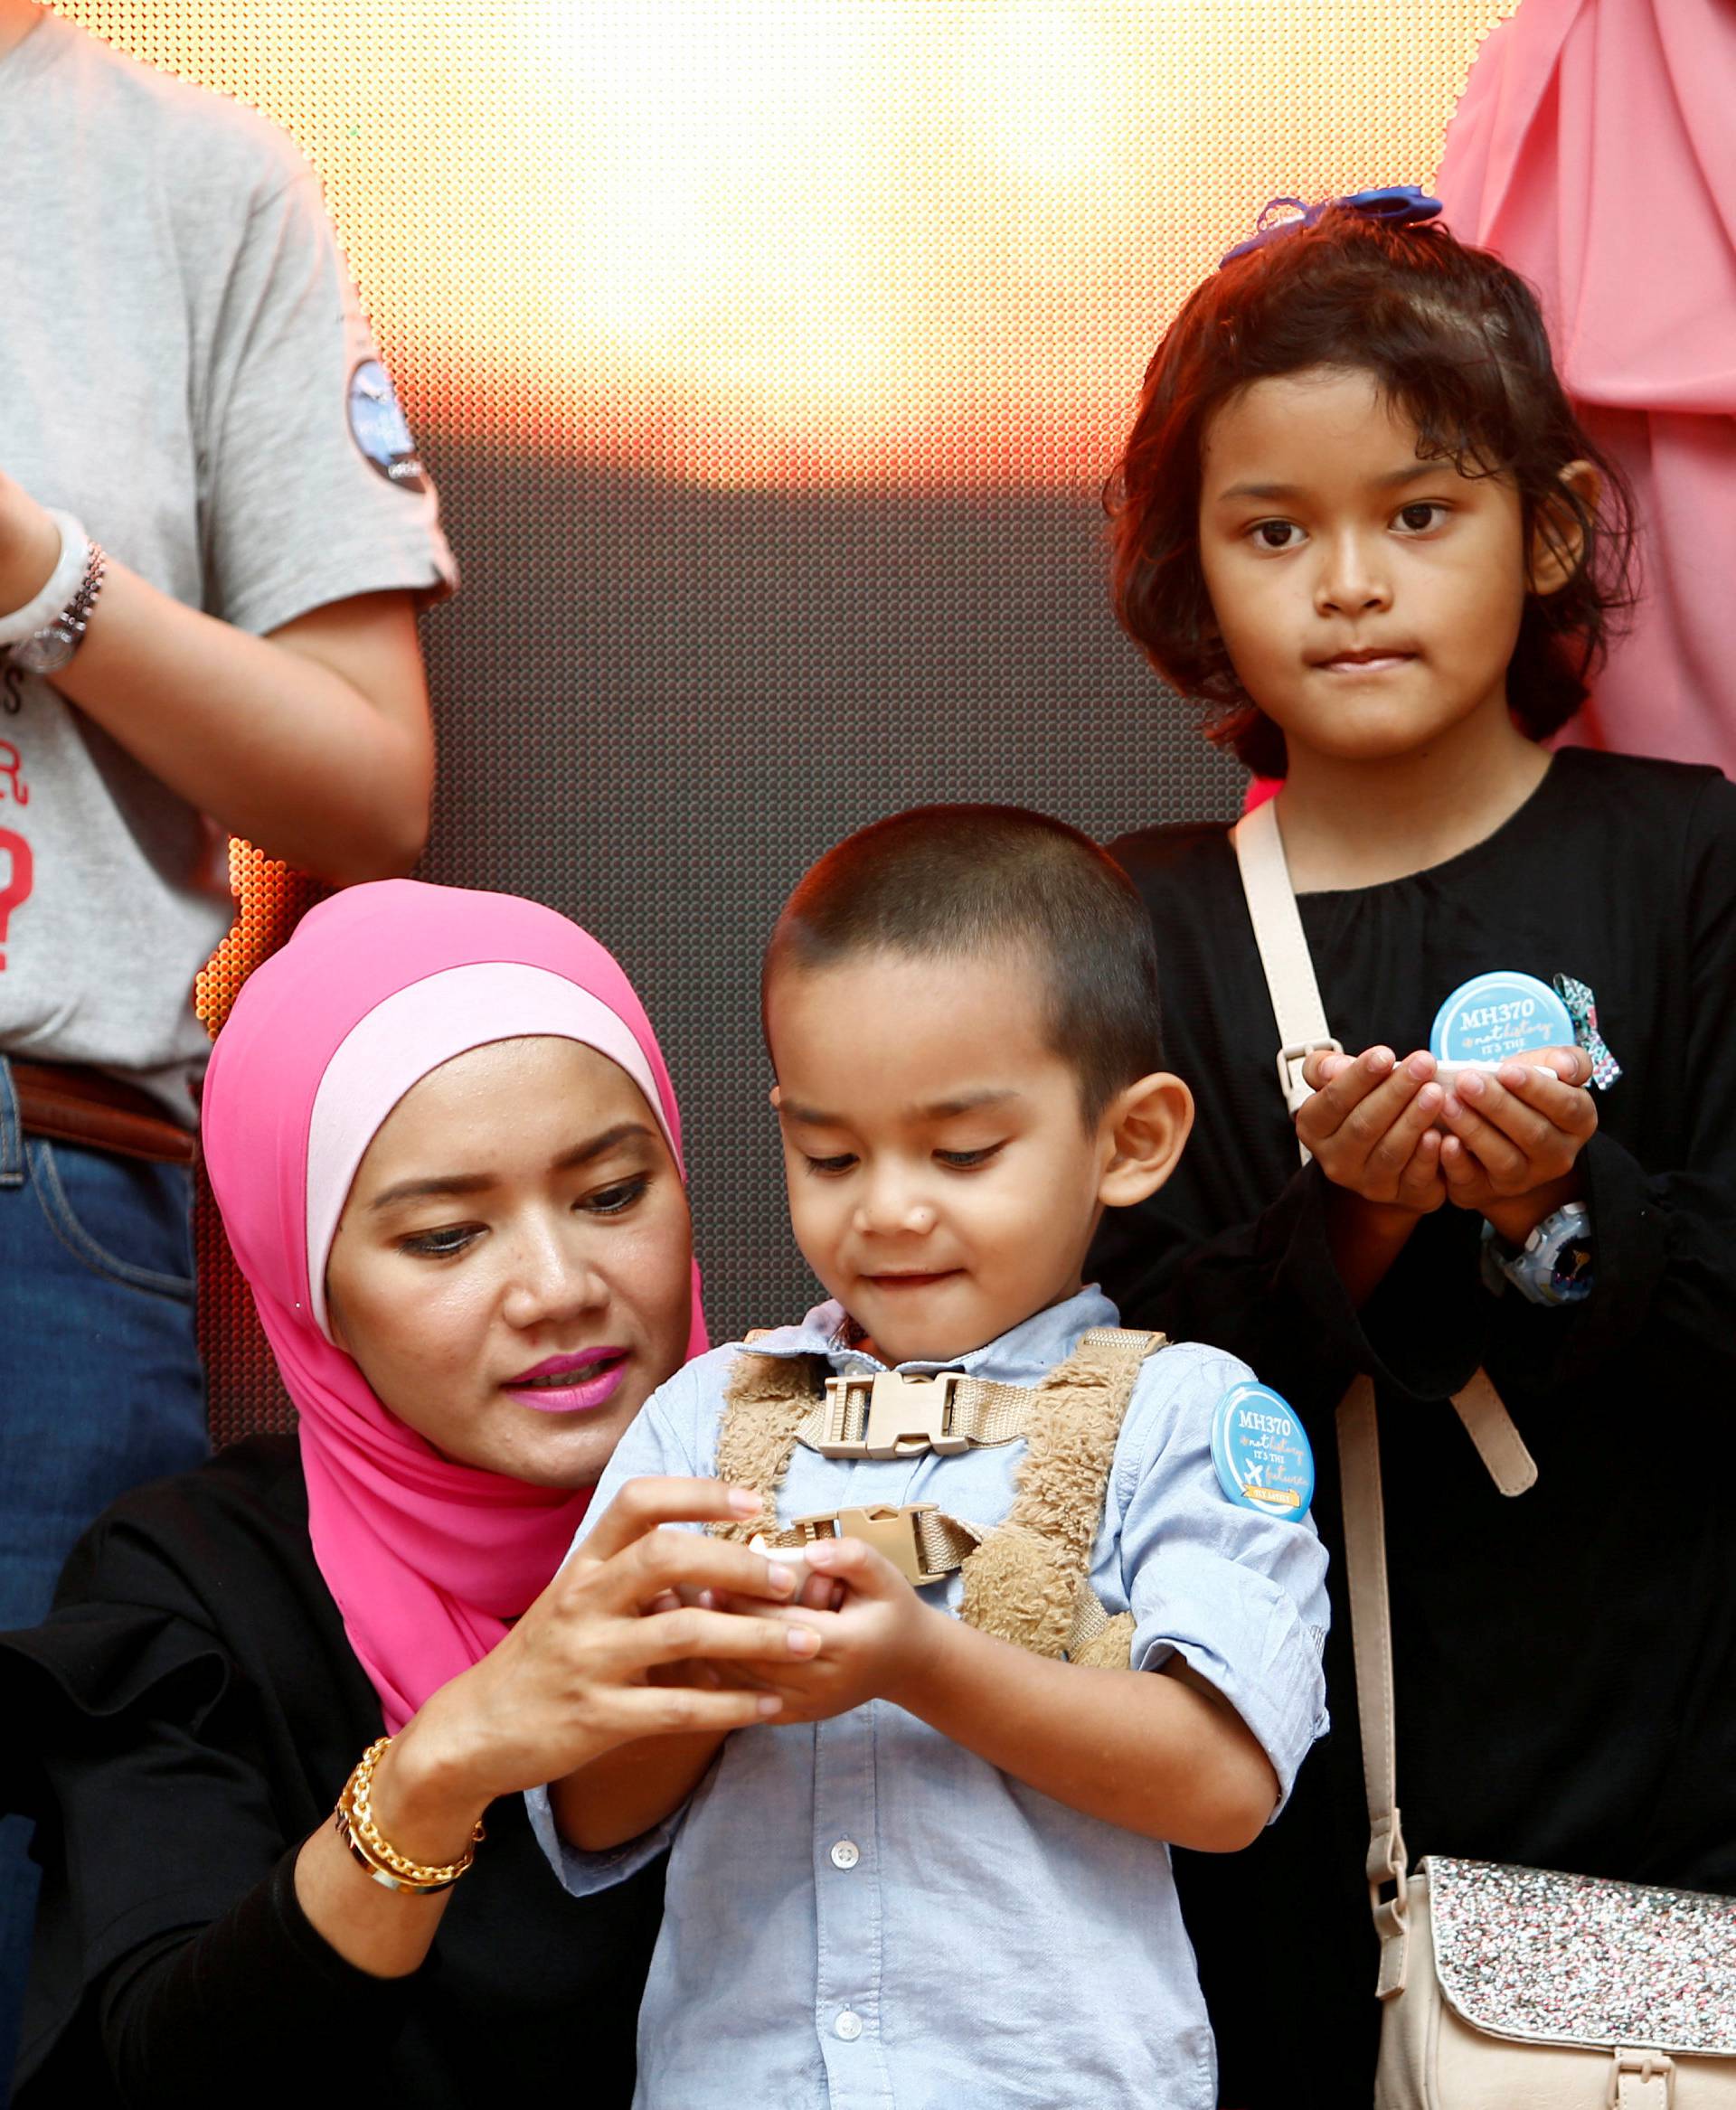 Malaysia Airlines flight MH370 flight attendant, Mohamad Hazrin Hasnan's wife, Intan, and children hold candles during its fourth annual remembrance event in Kuala Lumpur